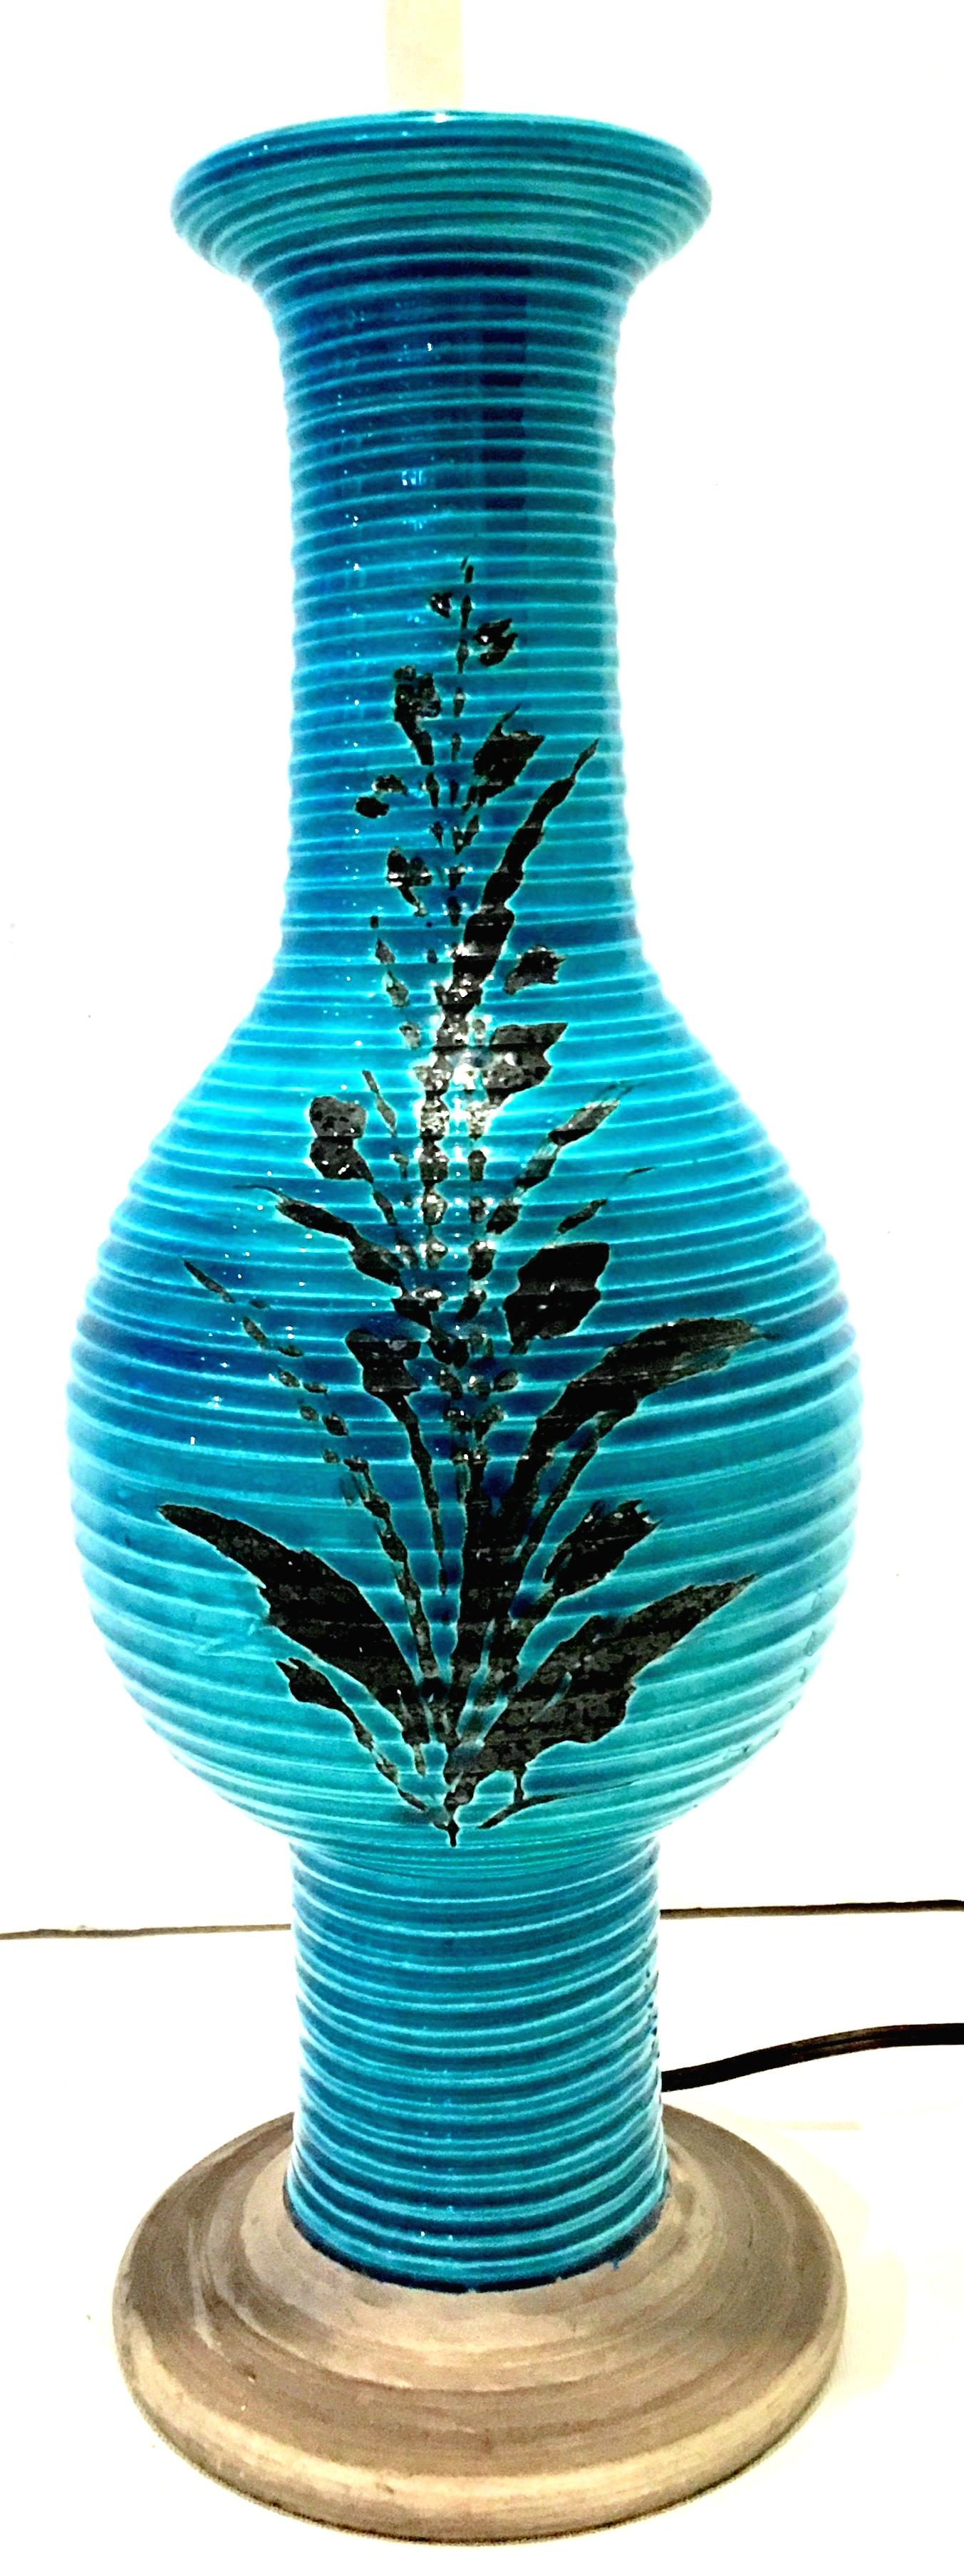 1960s Italian Cerulean Blue and Black Ceramic Glaze Pottery Lamp by, Bitossi In Good Condition For Sale In West Palm Beach, FL